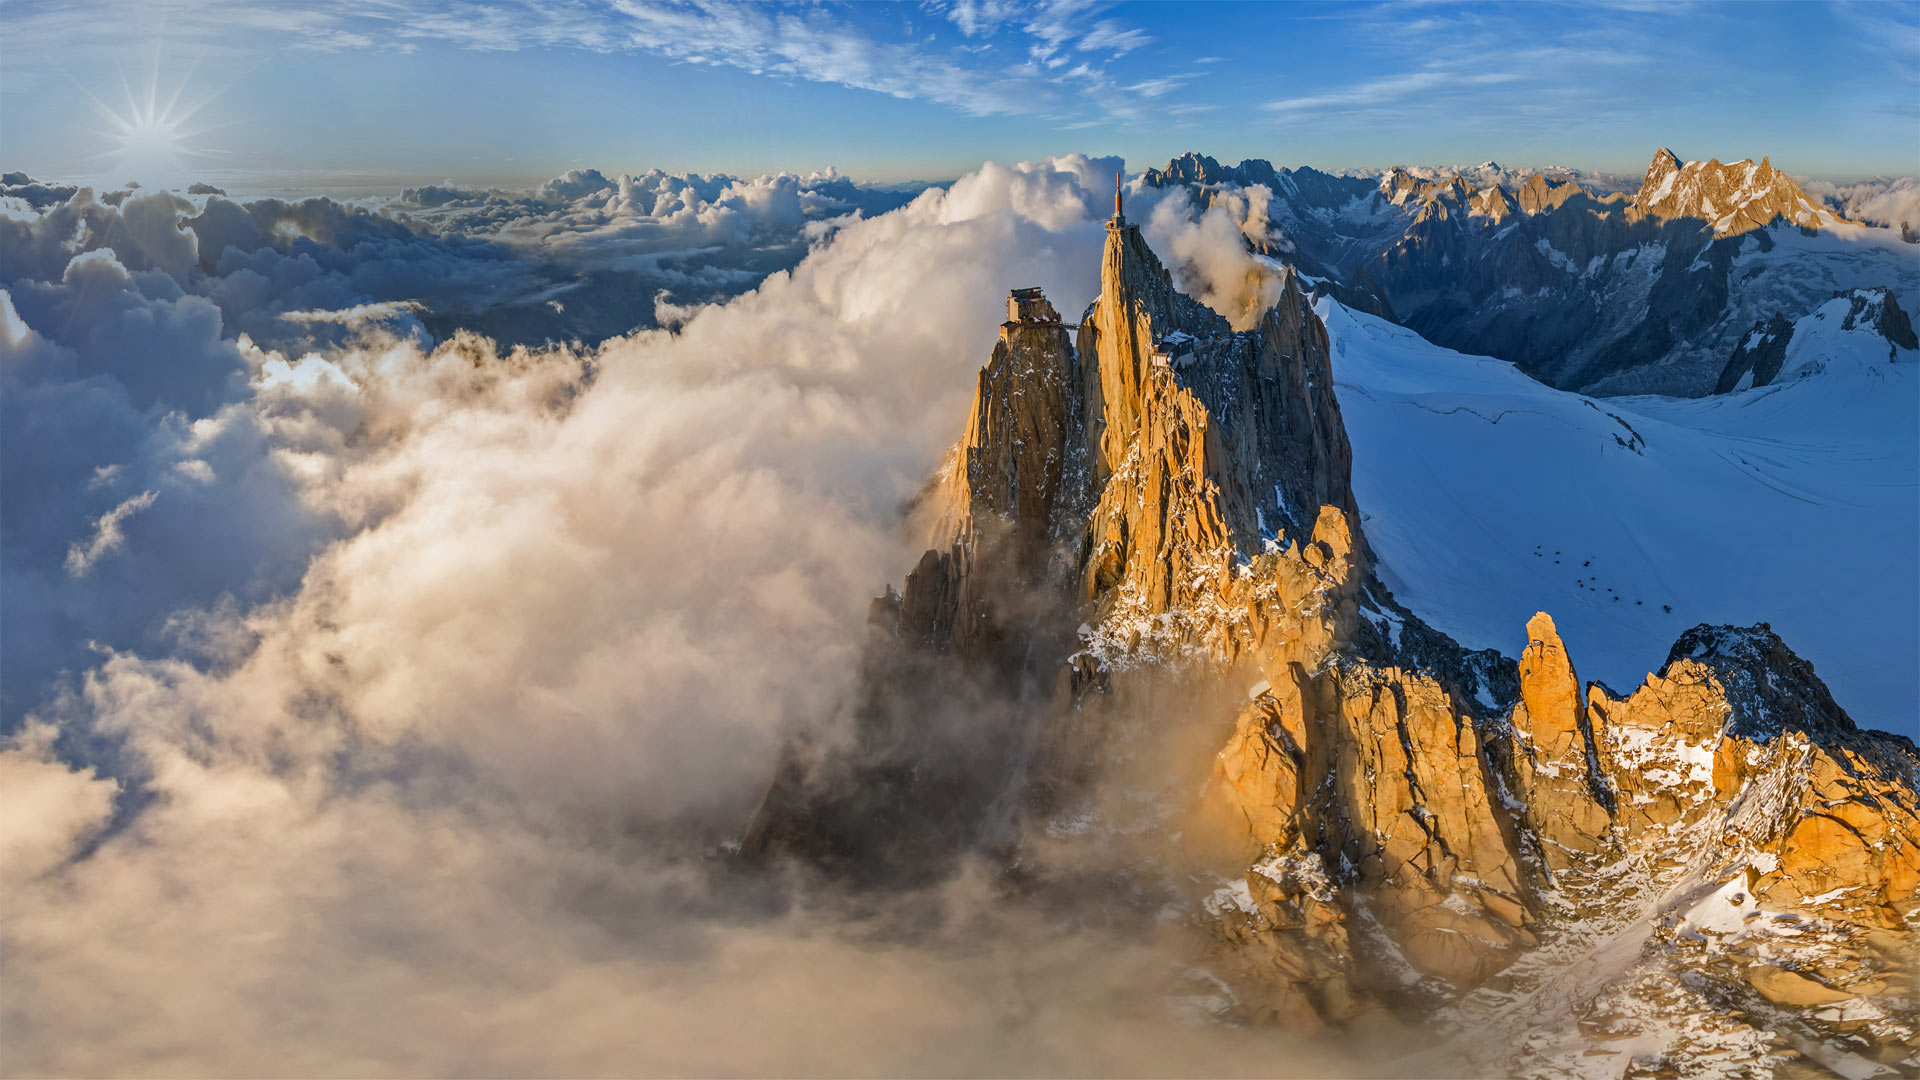 Aerial view of the Aiguille du Midi in the Mont Blanc massif, France - Amazing Aerial Agency/Offset by Shutterstock)